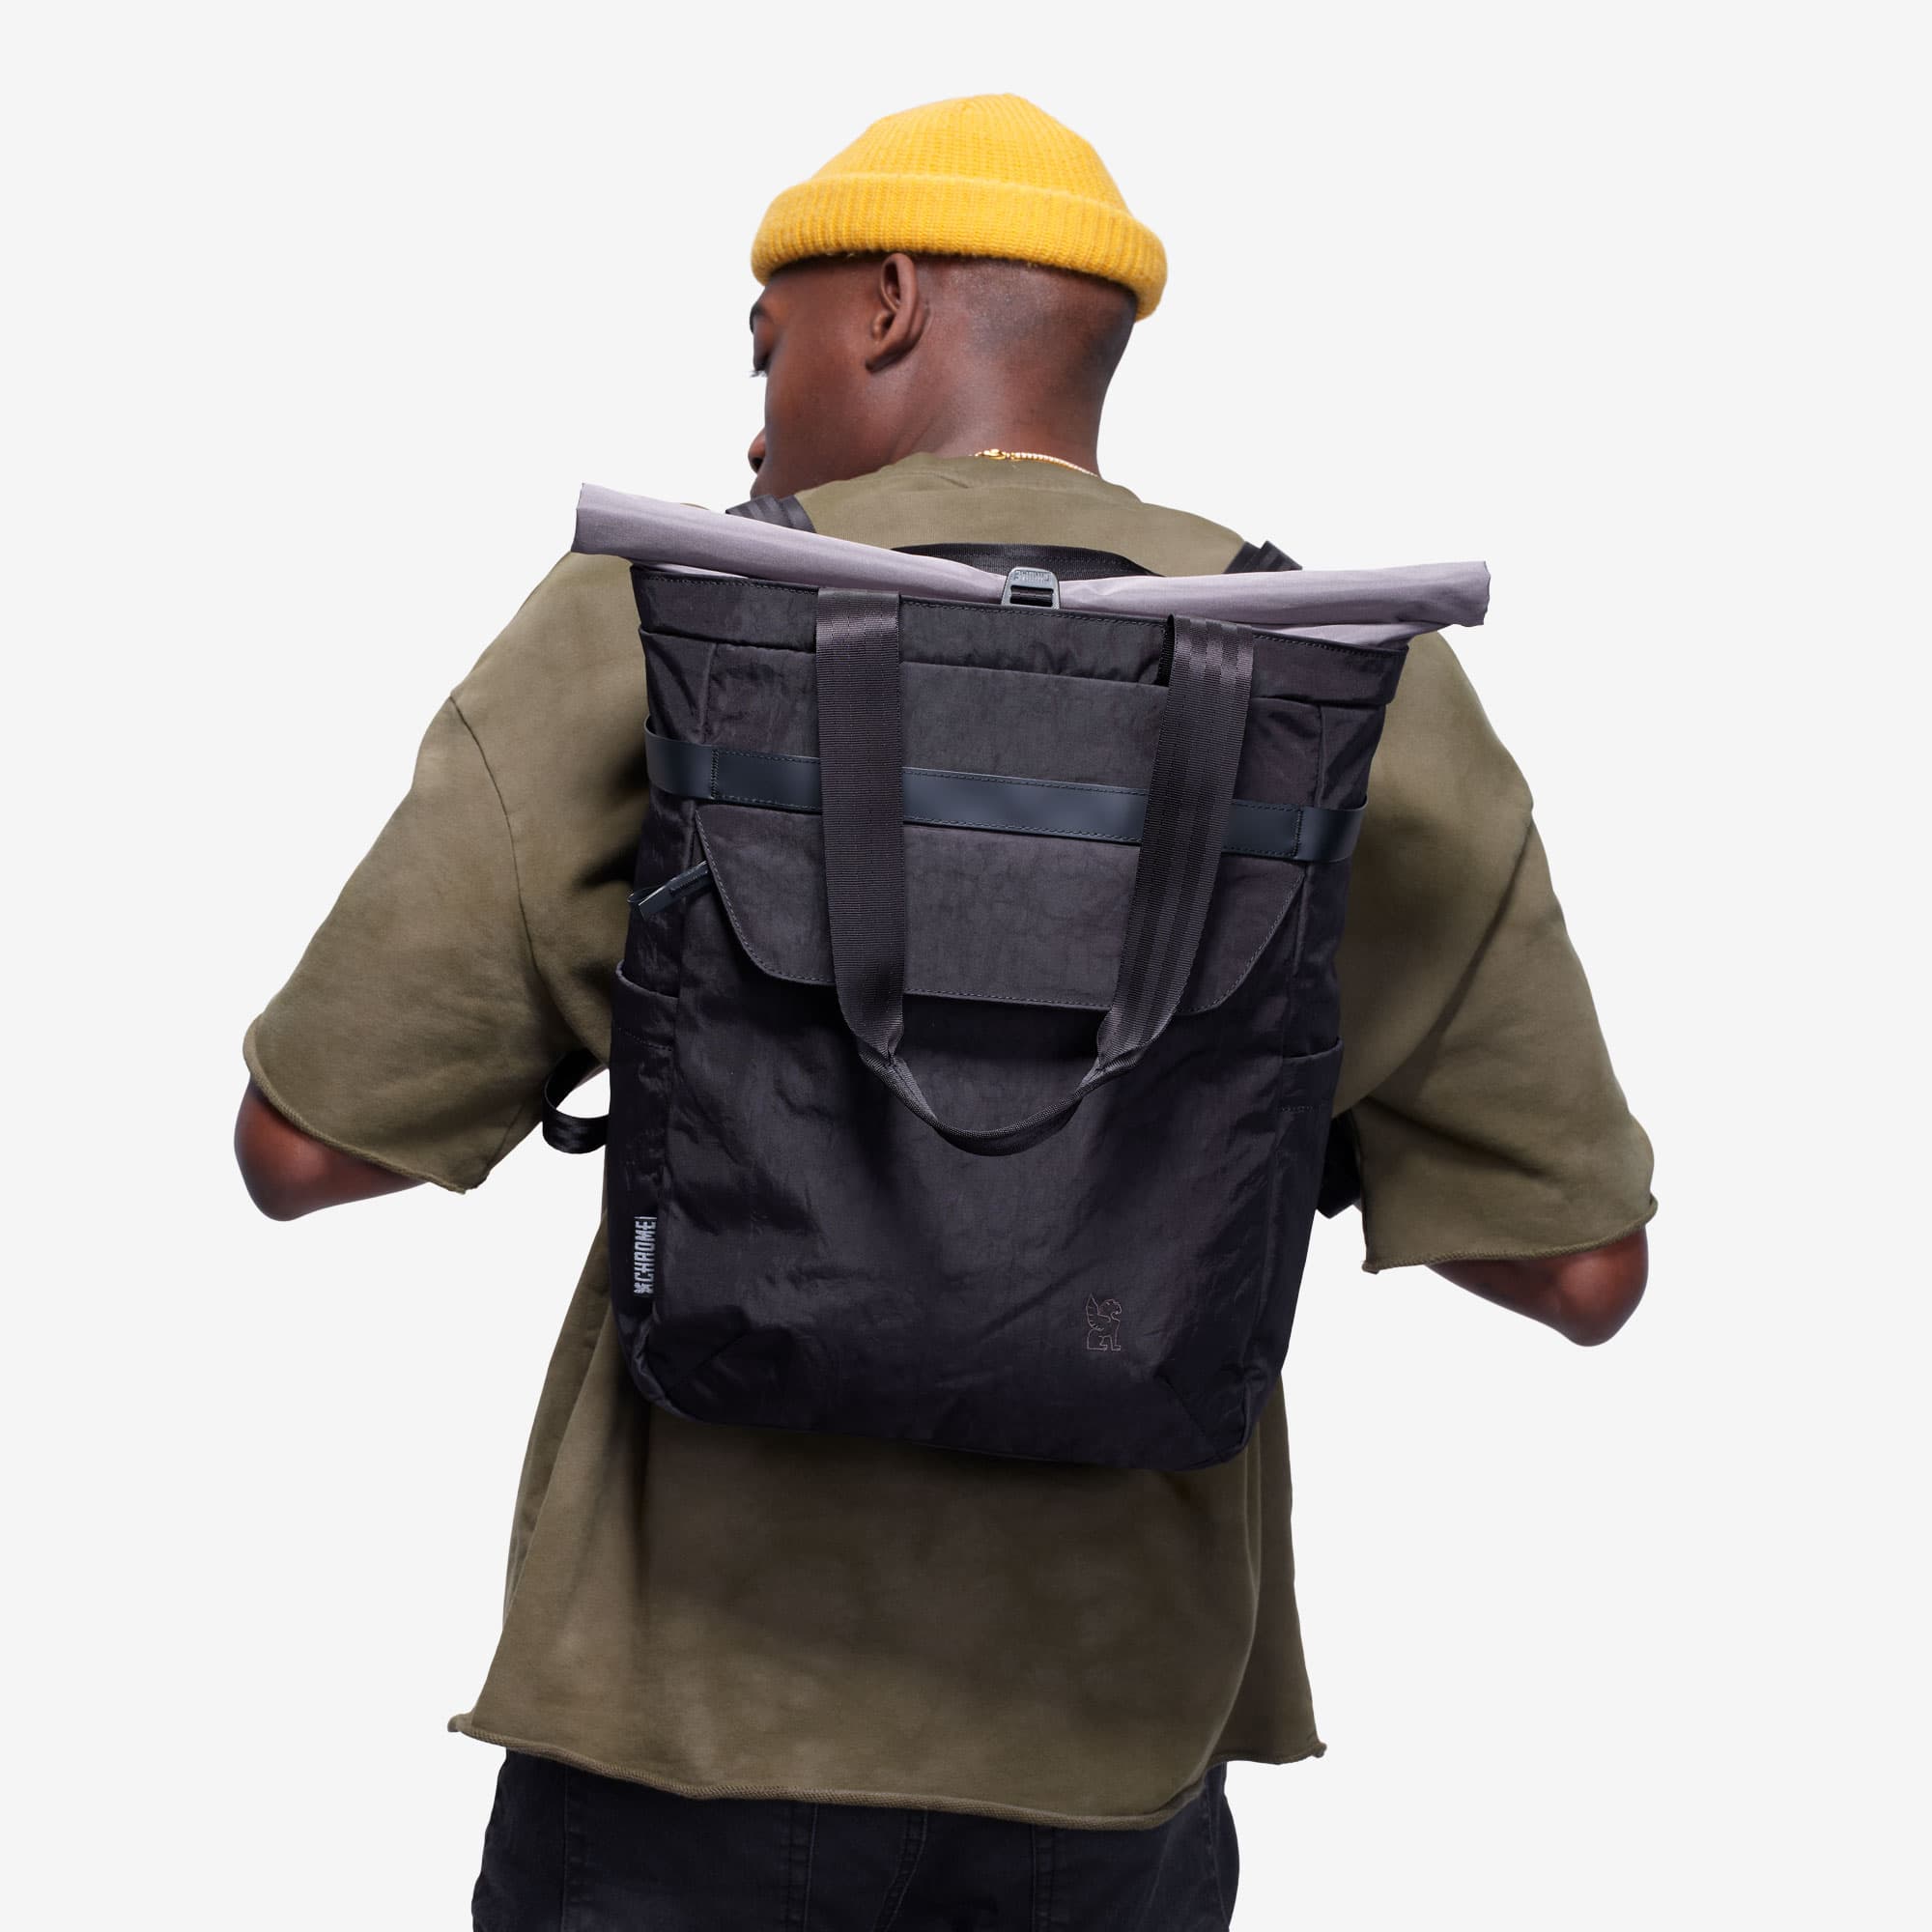 Valencia tote on a man as a backpack